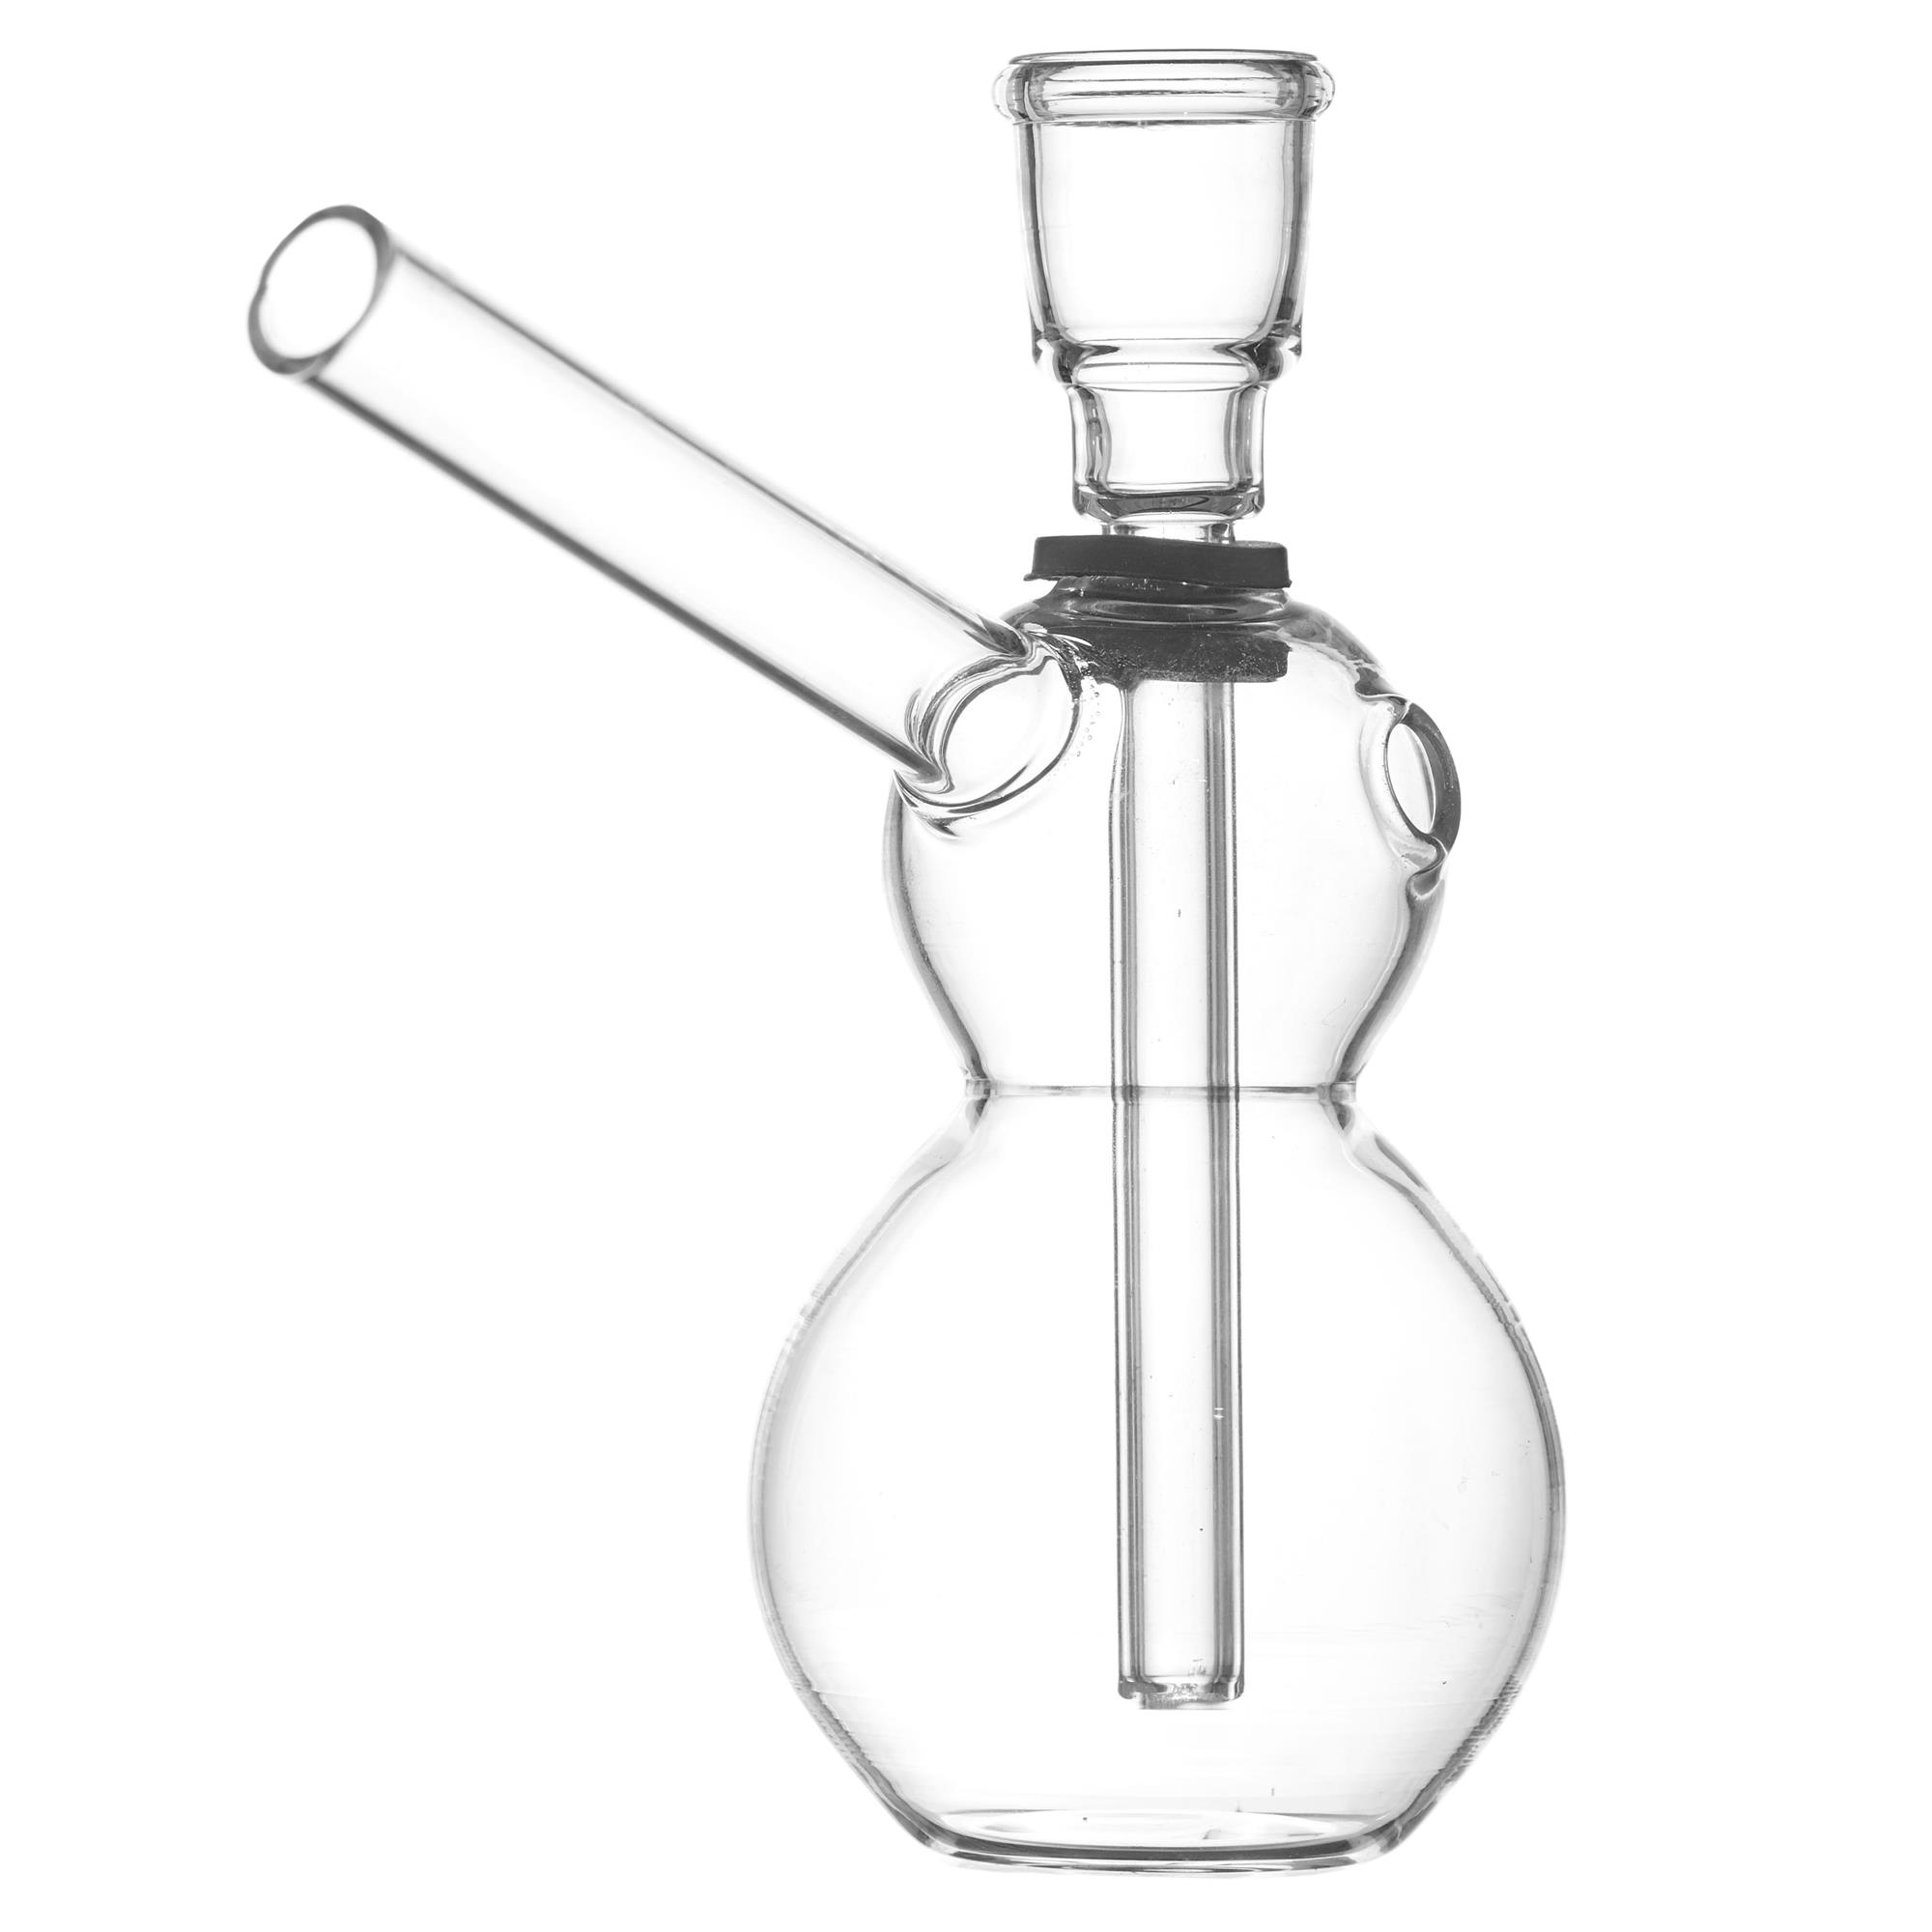 THE SNOWMAN GLASS BONG HAND PIPE